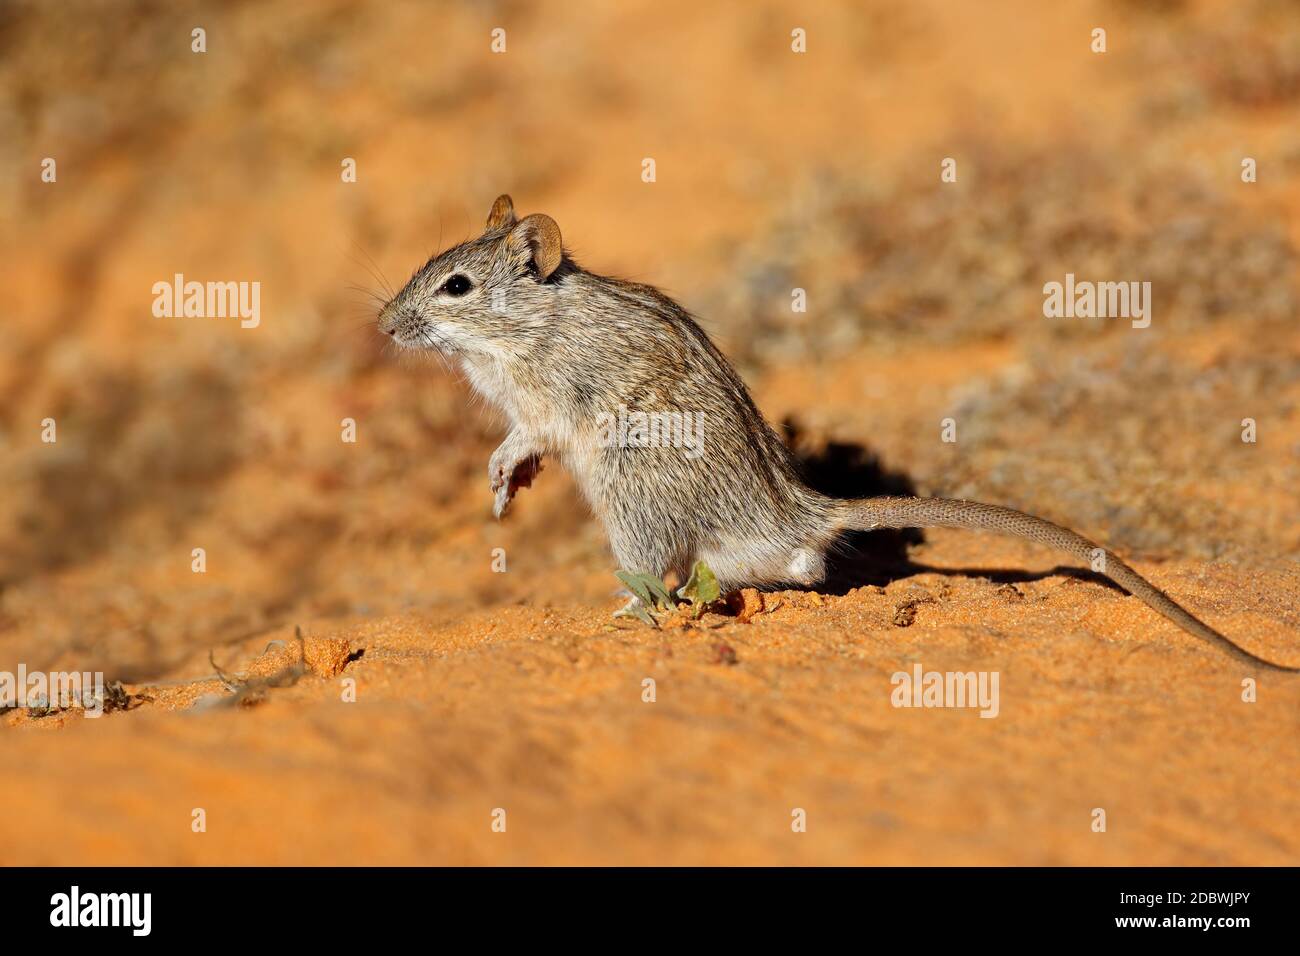 A small striped mouse (Rhabdomys pumilio) in natural habitat, South Africa Stock Photo